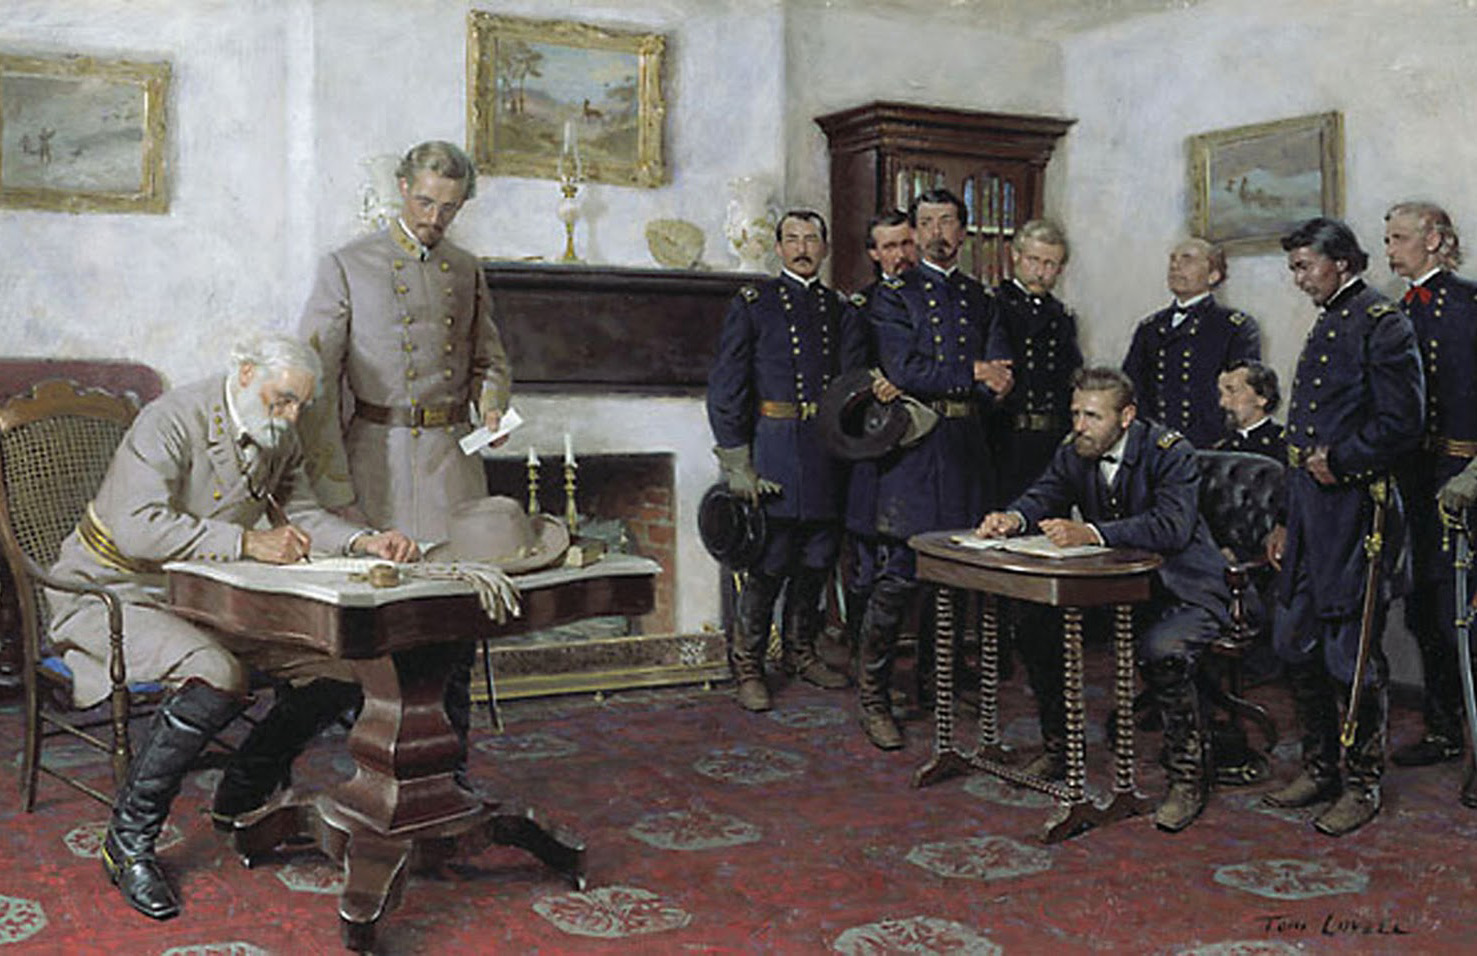 Lee surrenders at Appomattox History Mystery Man: Historical